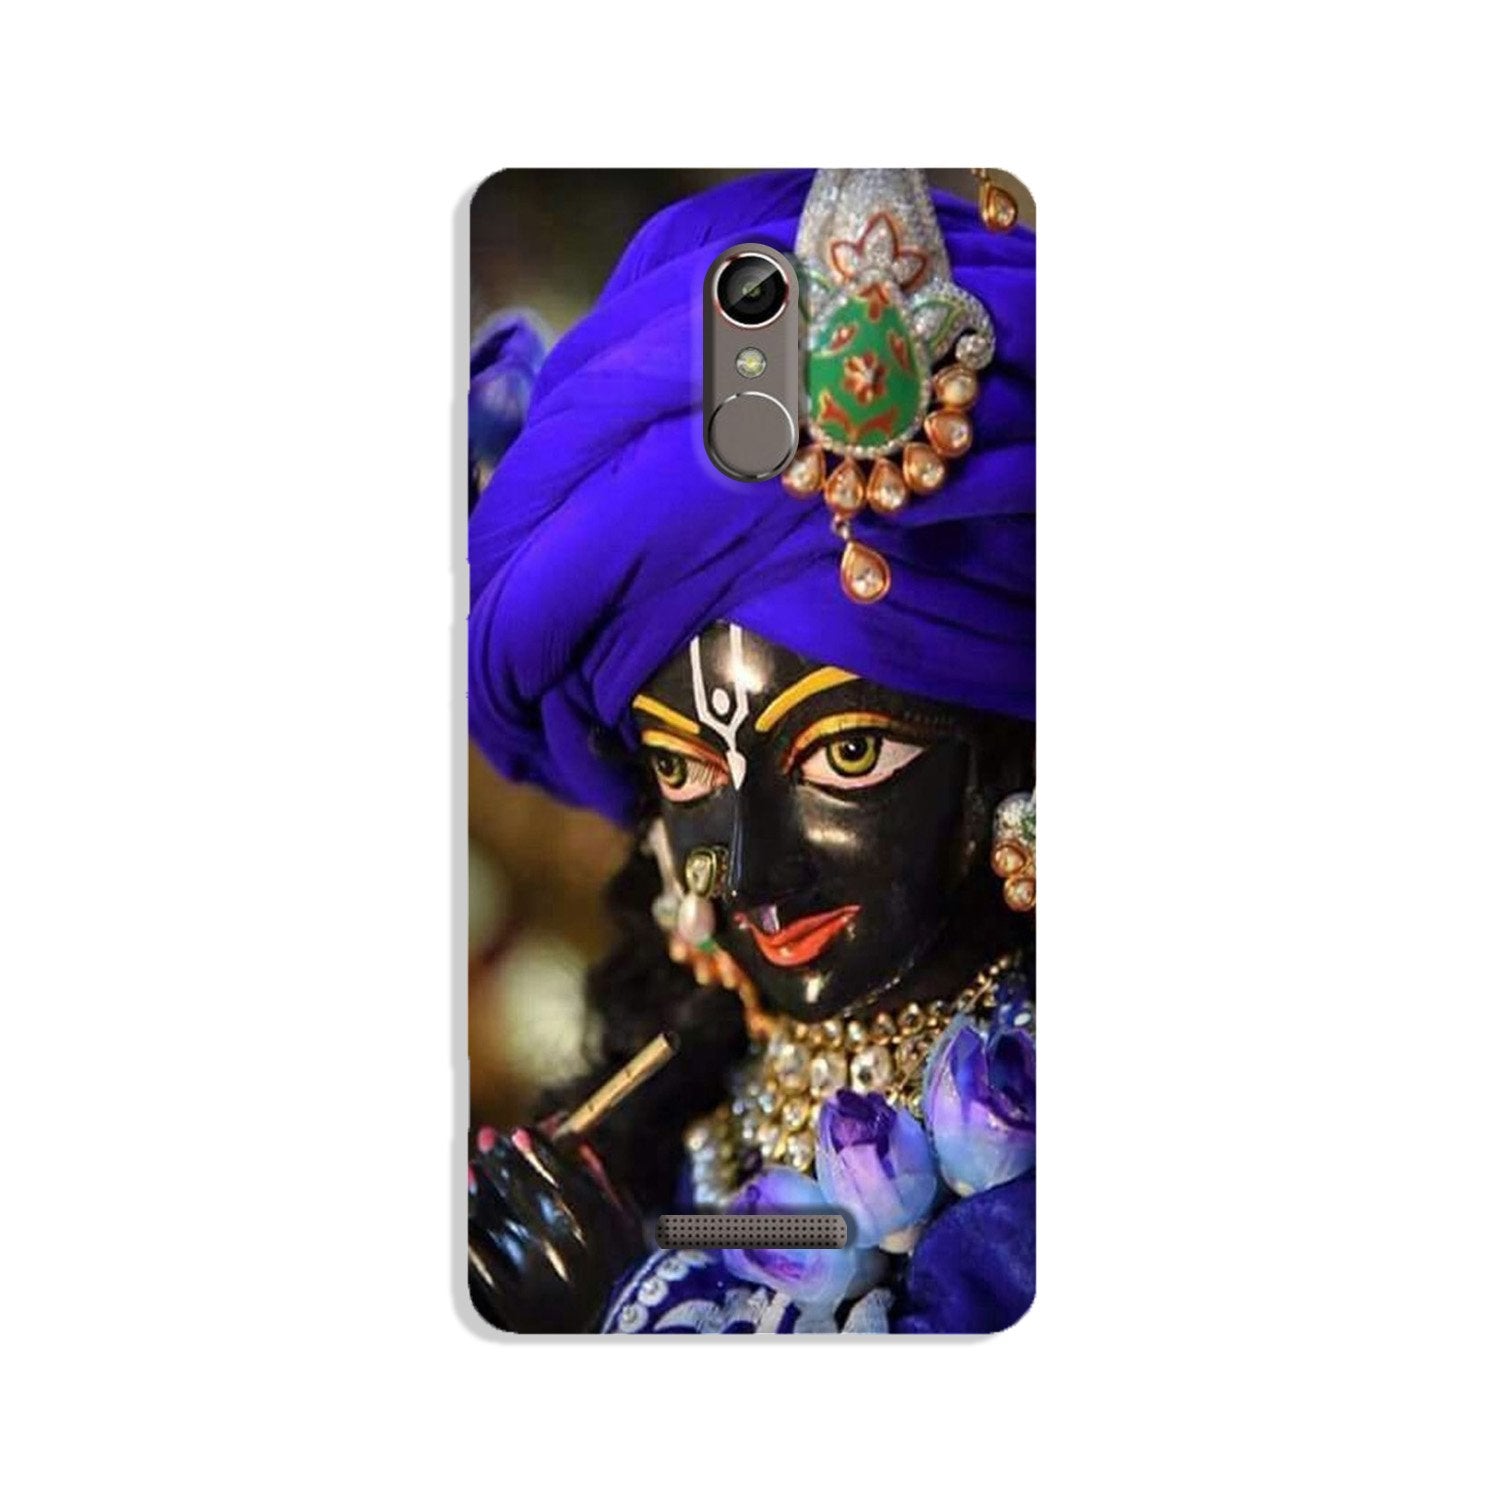 Lord Krishna4 Case for Gionee S6s